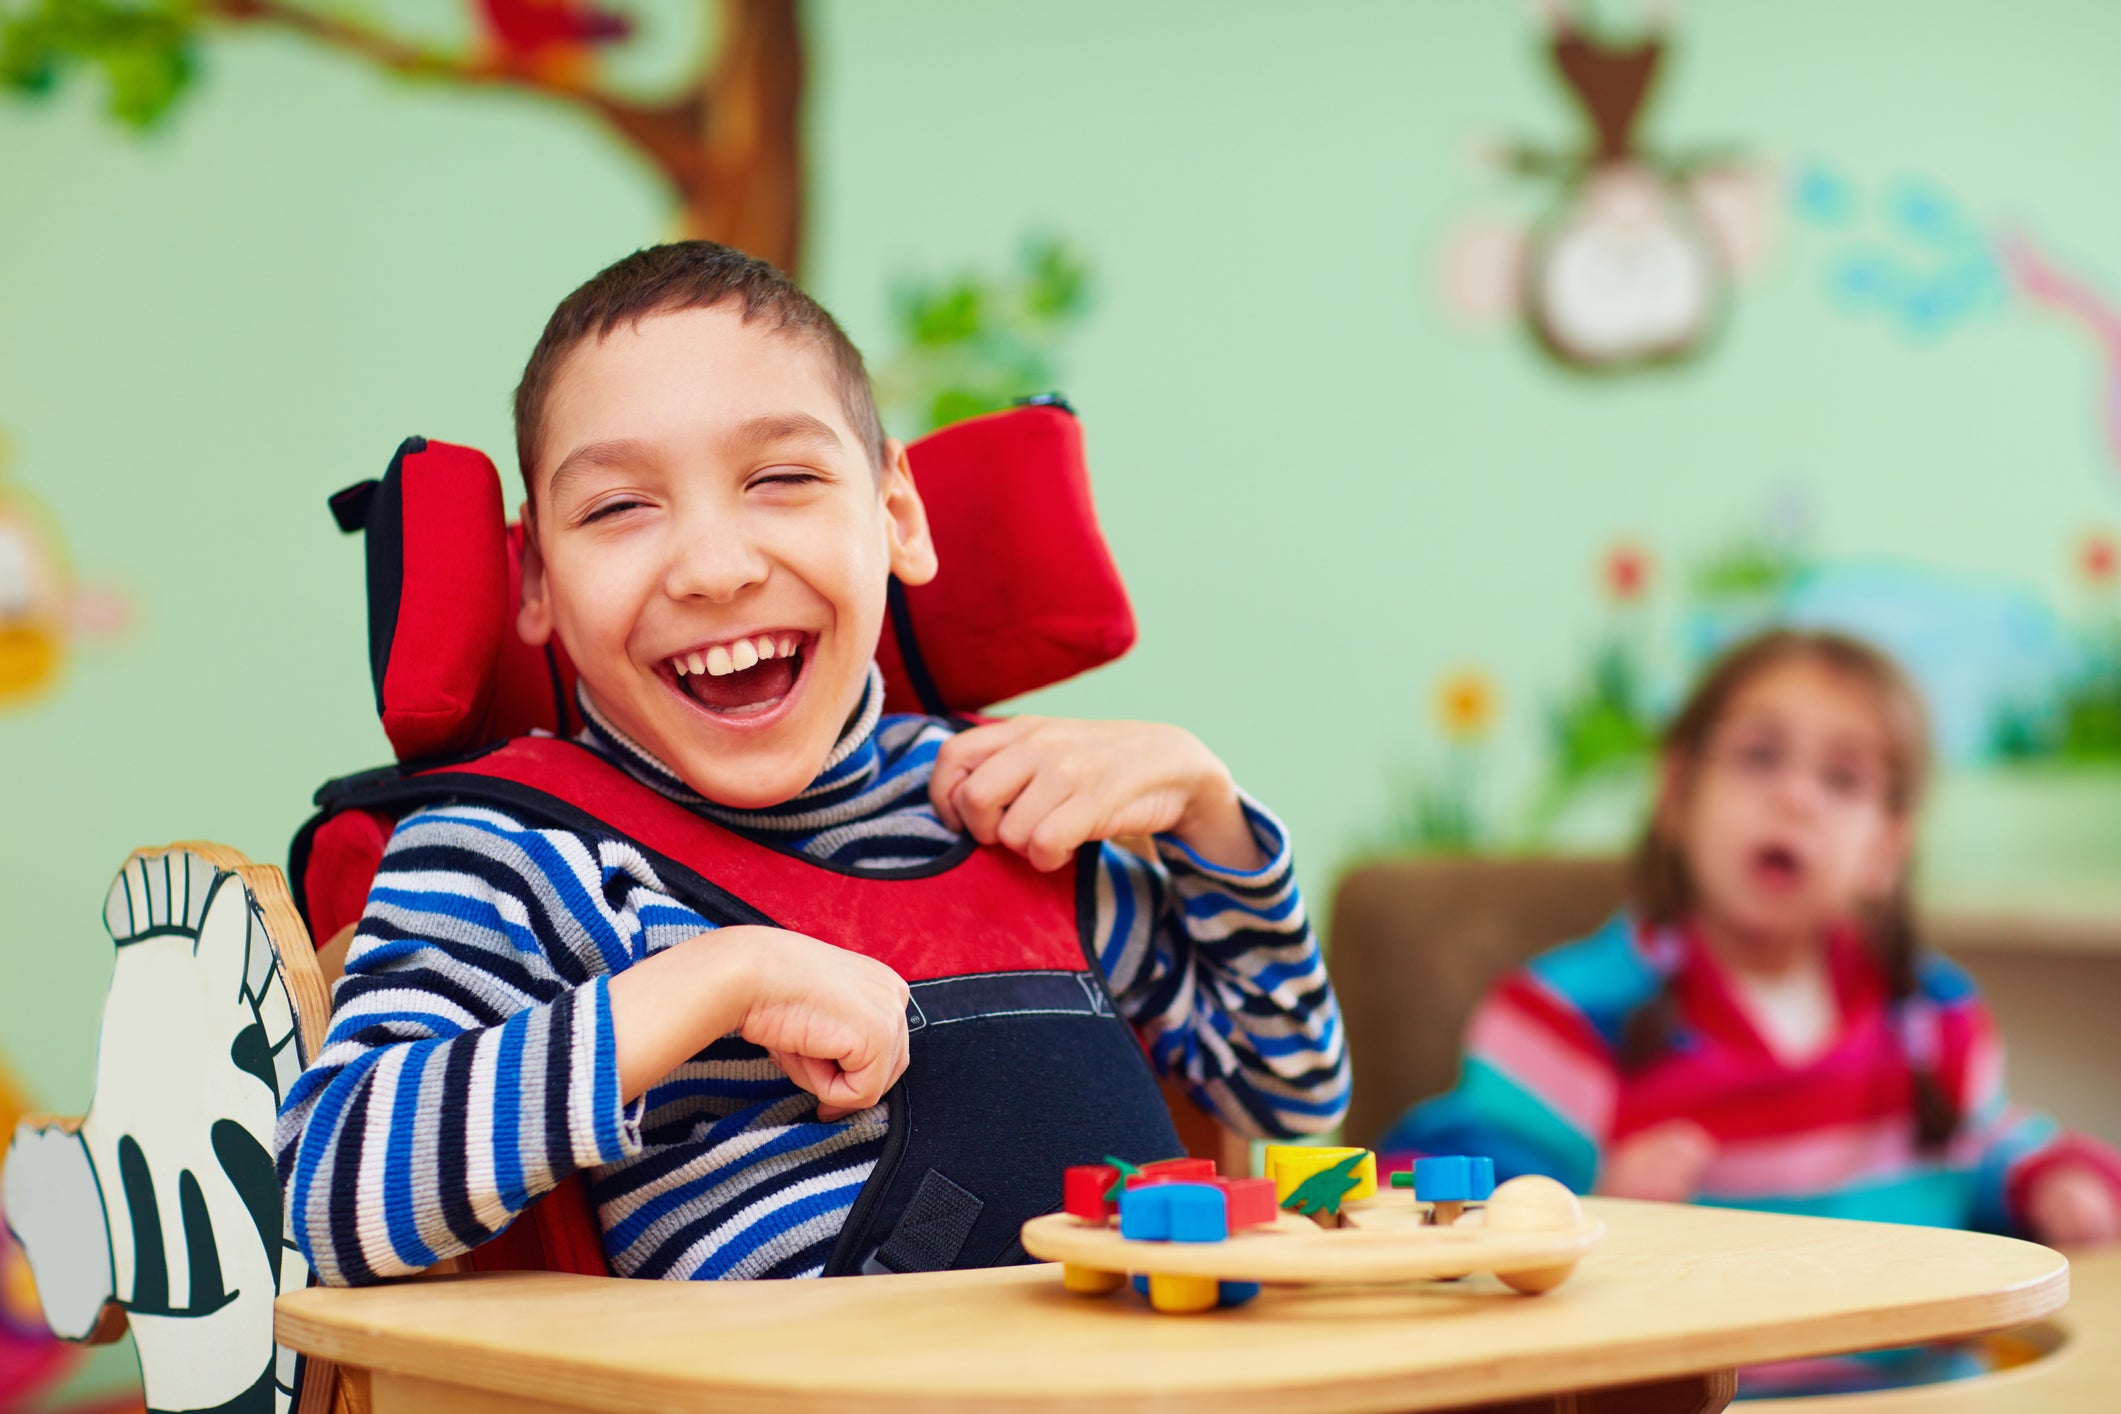 Cheerful, smiling boy sitting in high chair with colorful toys on tray